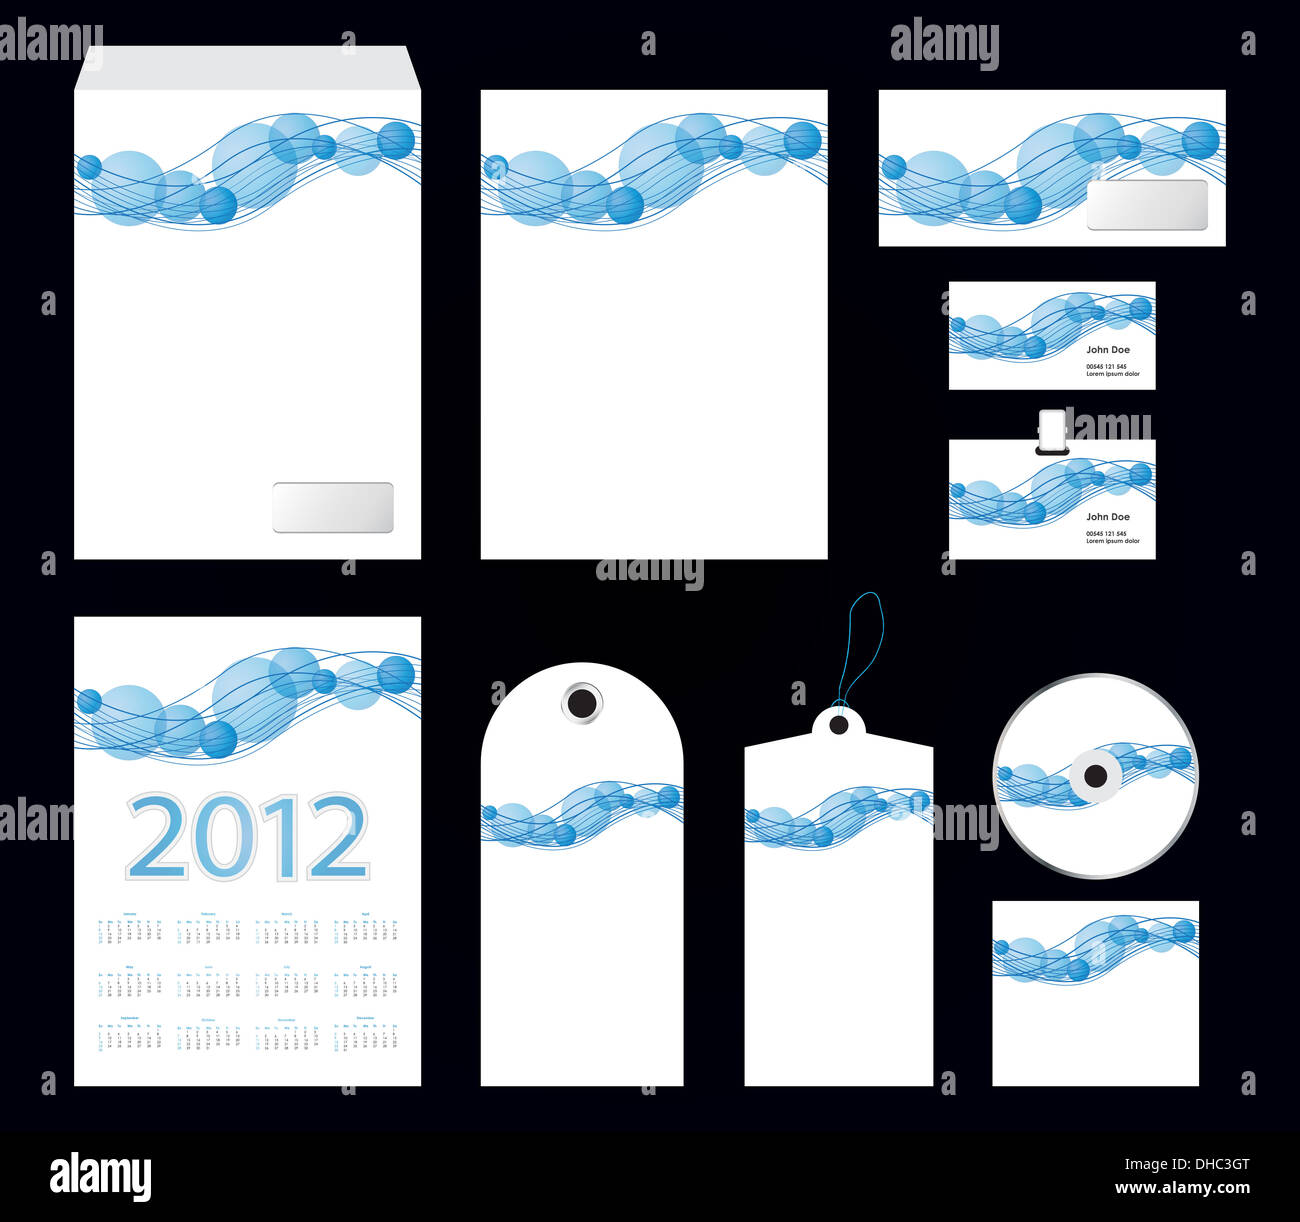 vector template of identity set - stationery design Stock Photo